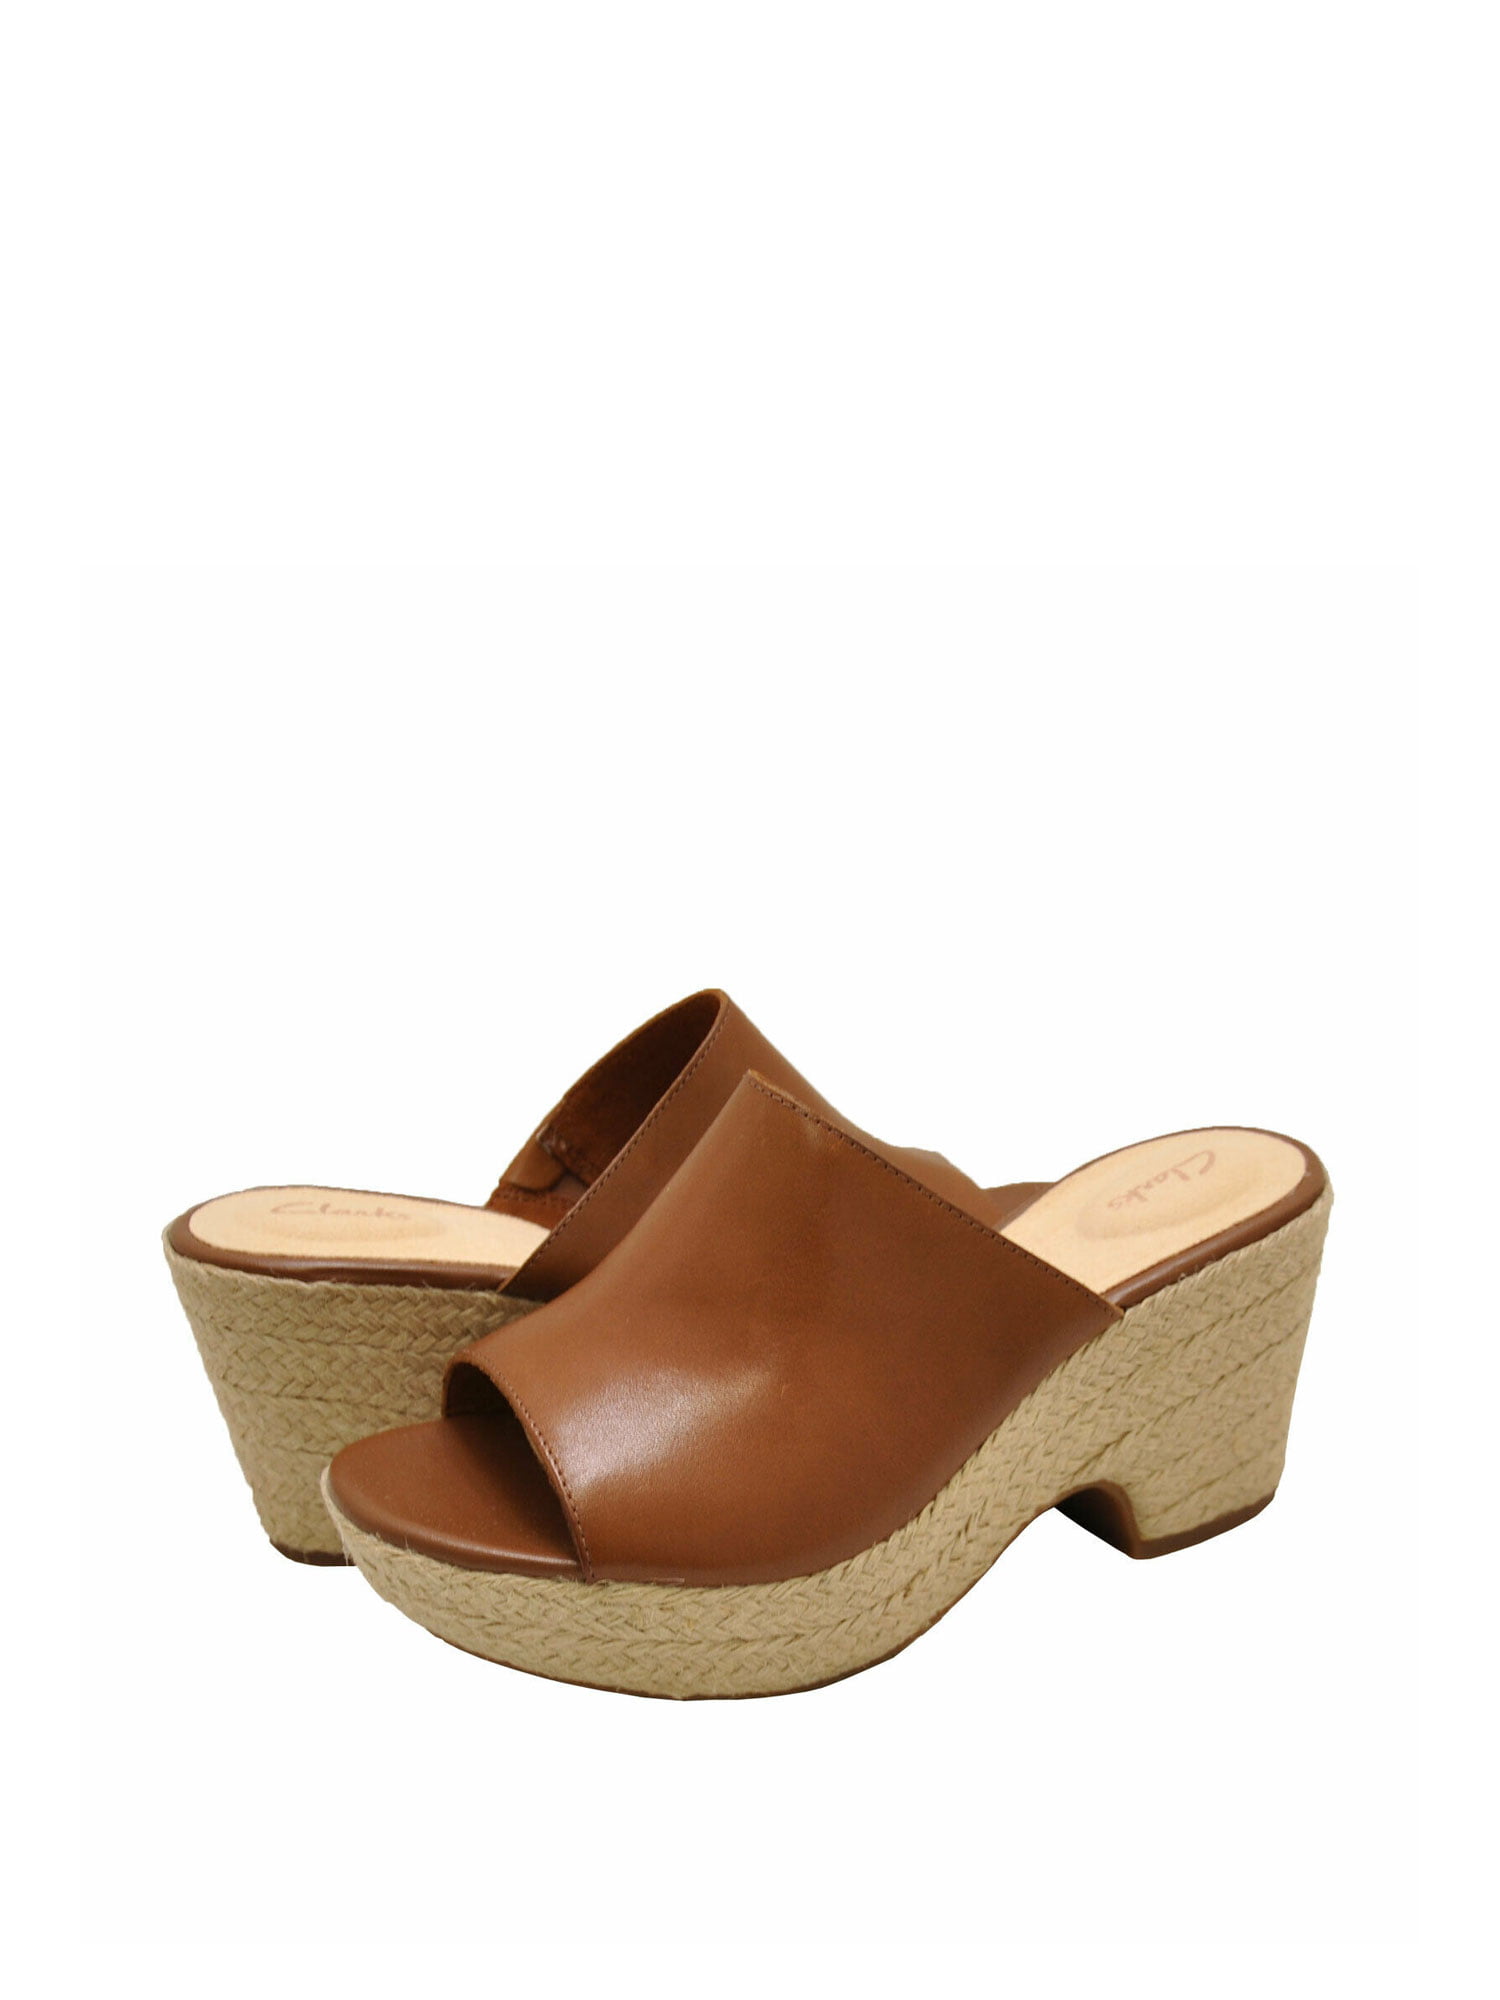 clarks wedge mules